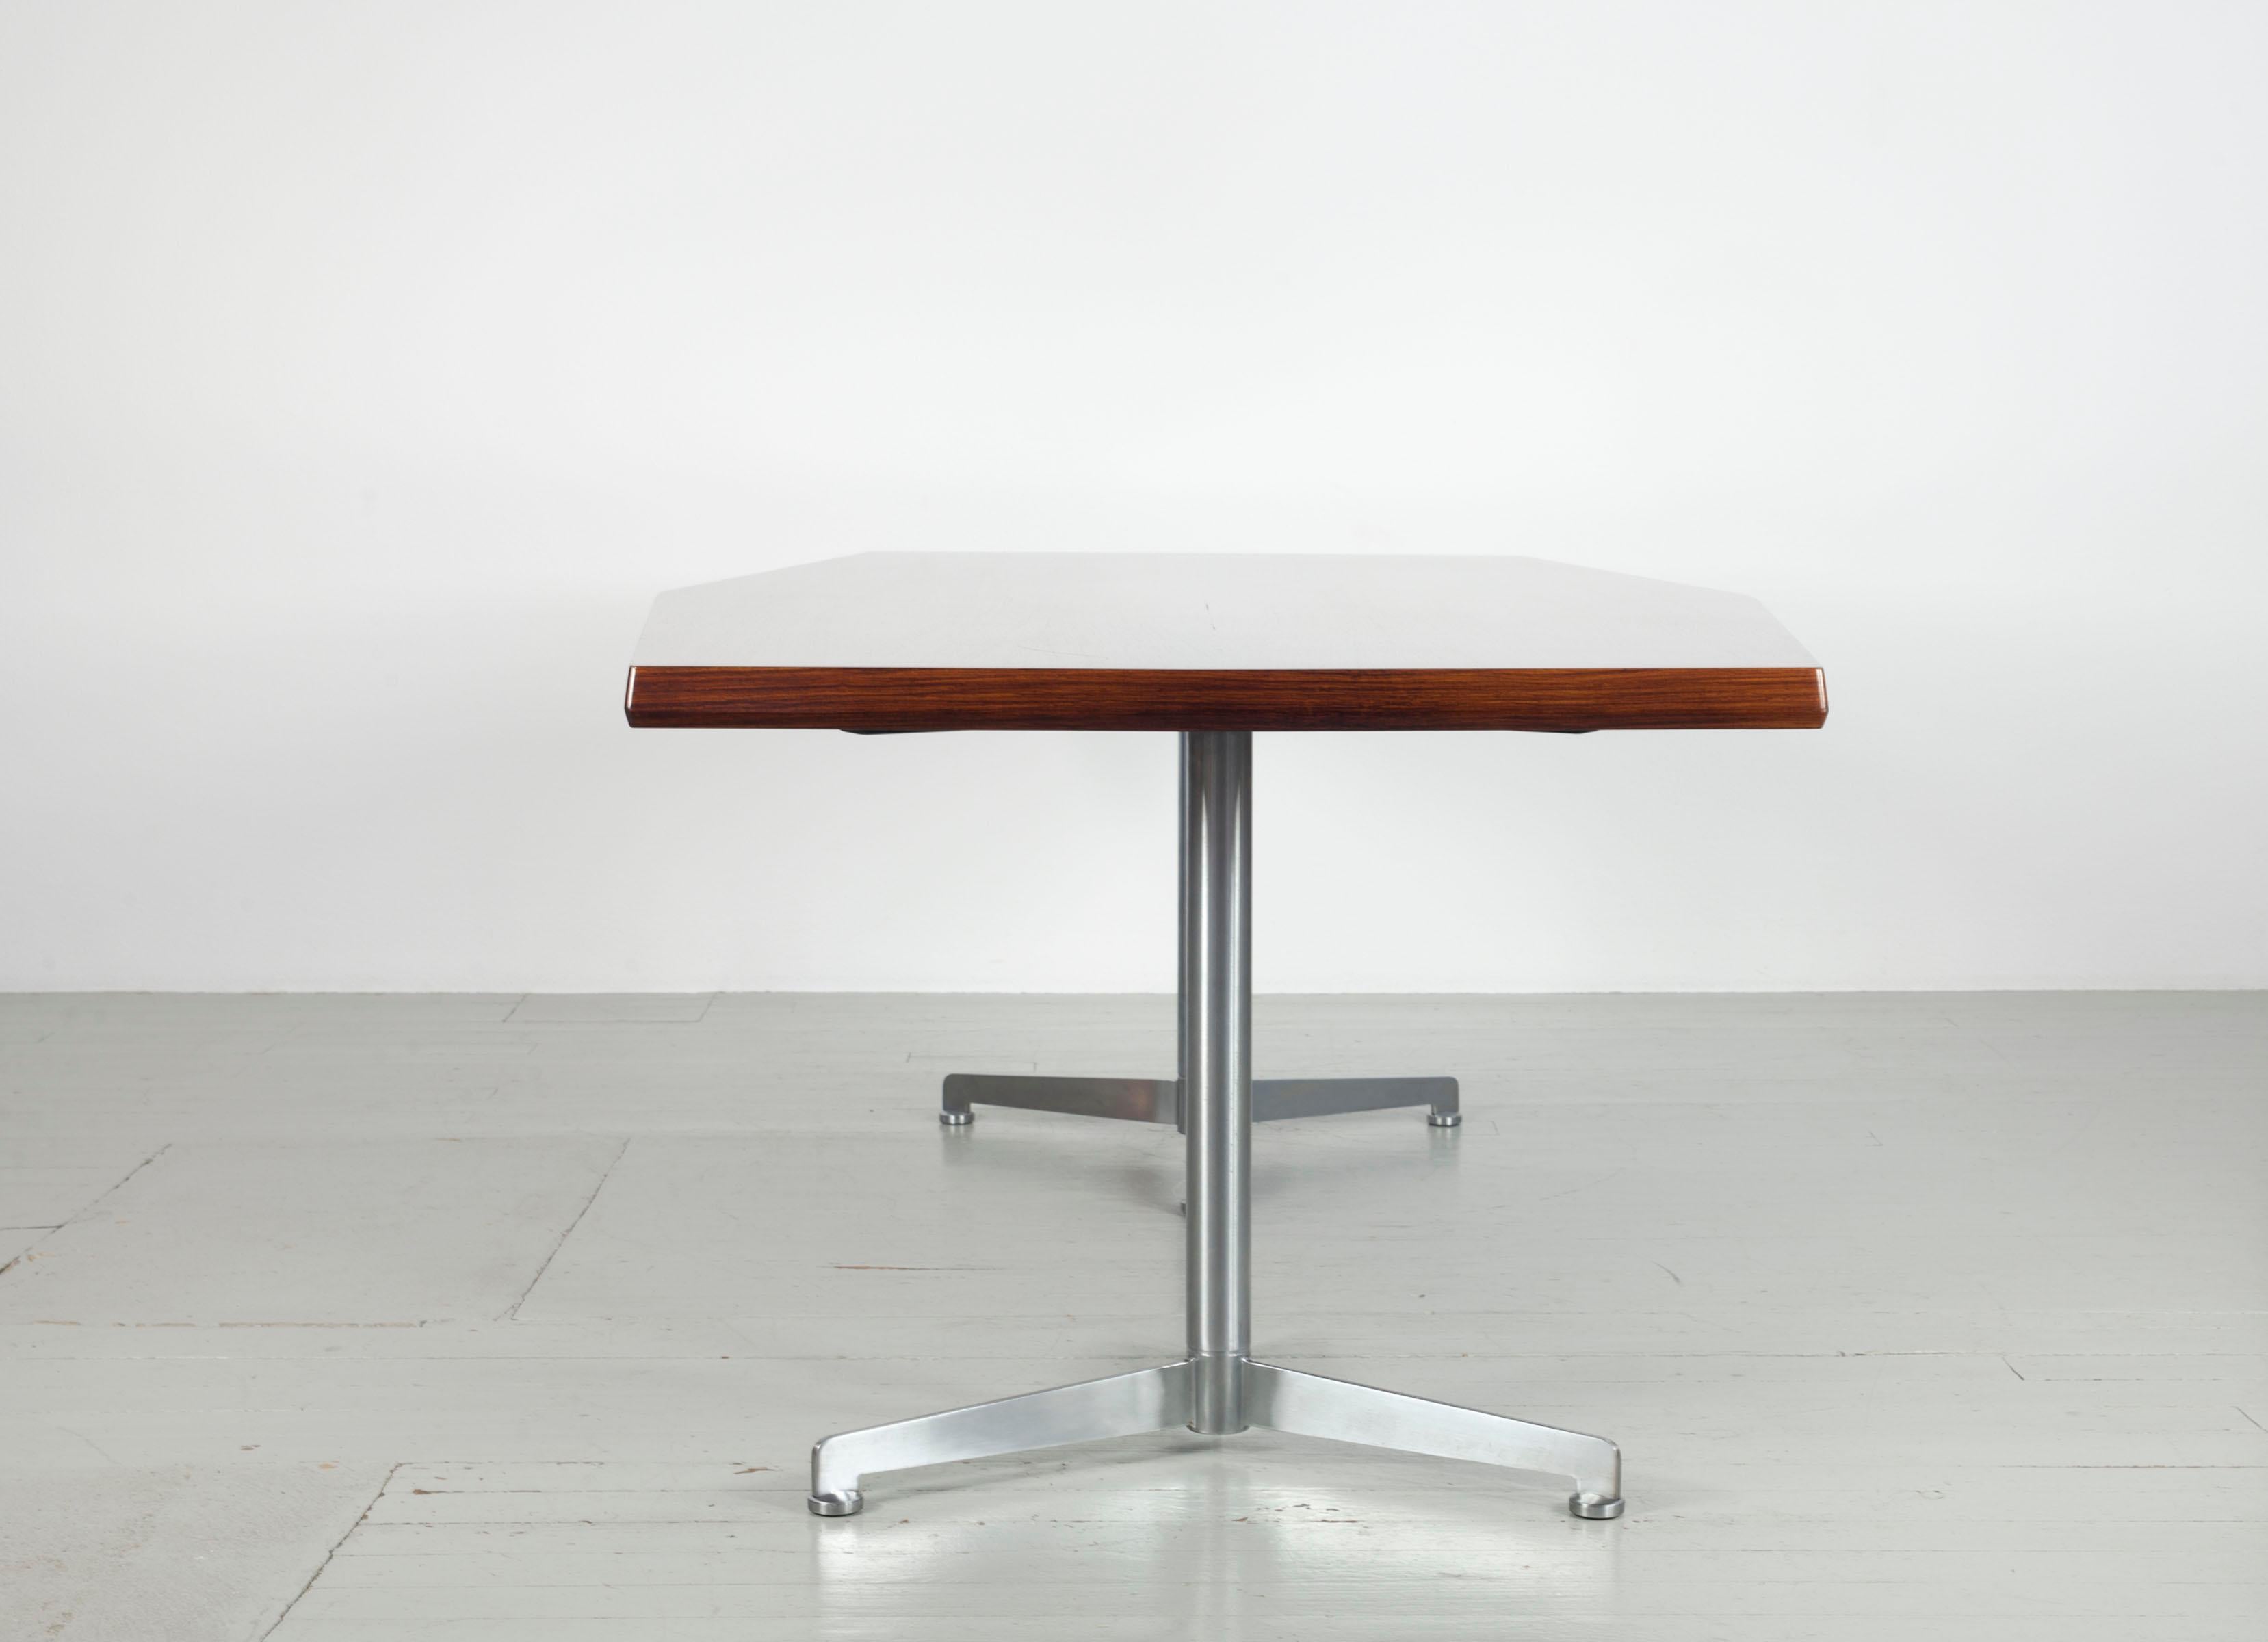 This Italian table was designed by Osvaldo Borsani and manufactured by Tecno in the 1960s. Apart from the table legs, which are made of polished aluminium, the table is made of rosewood. Due to its style, it can be used in many ways, for example as